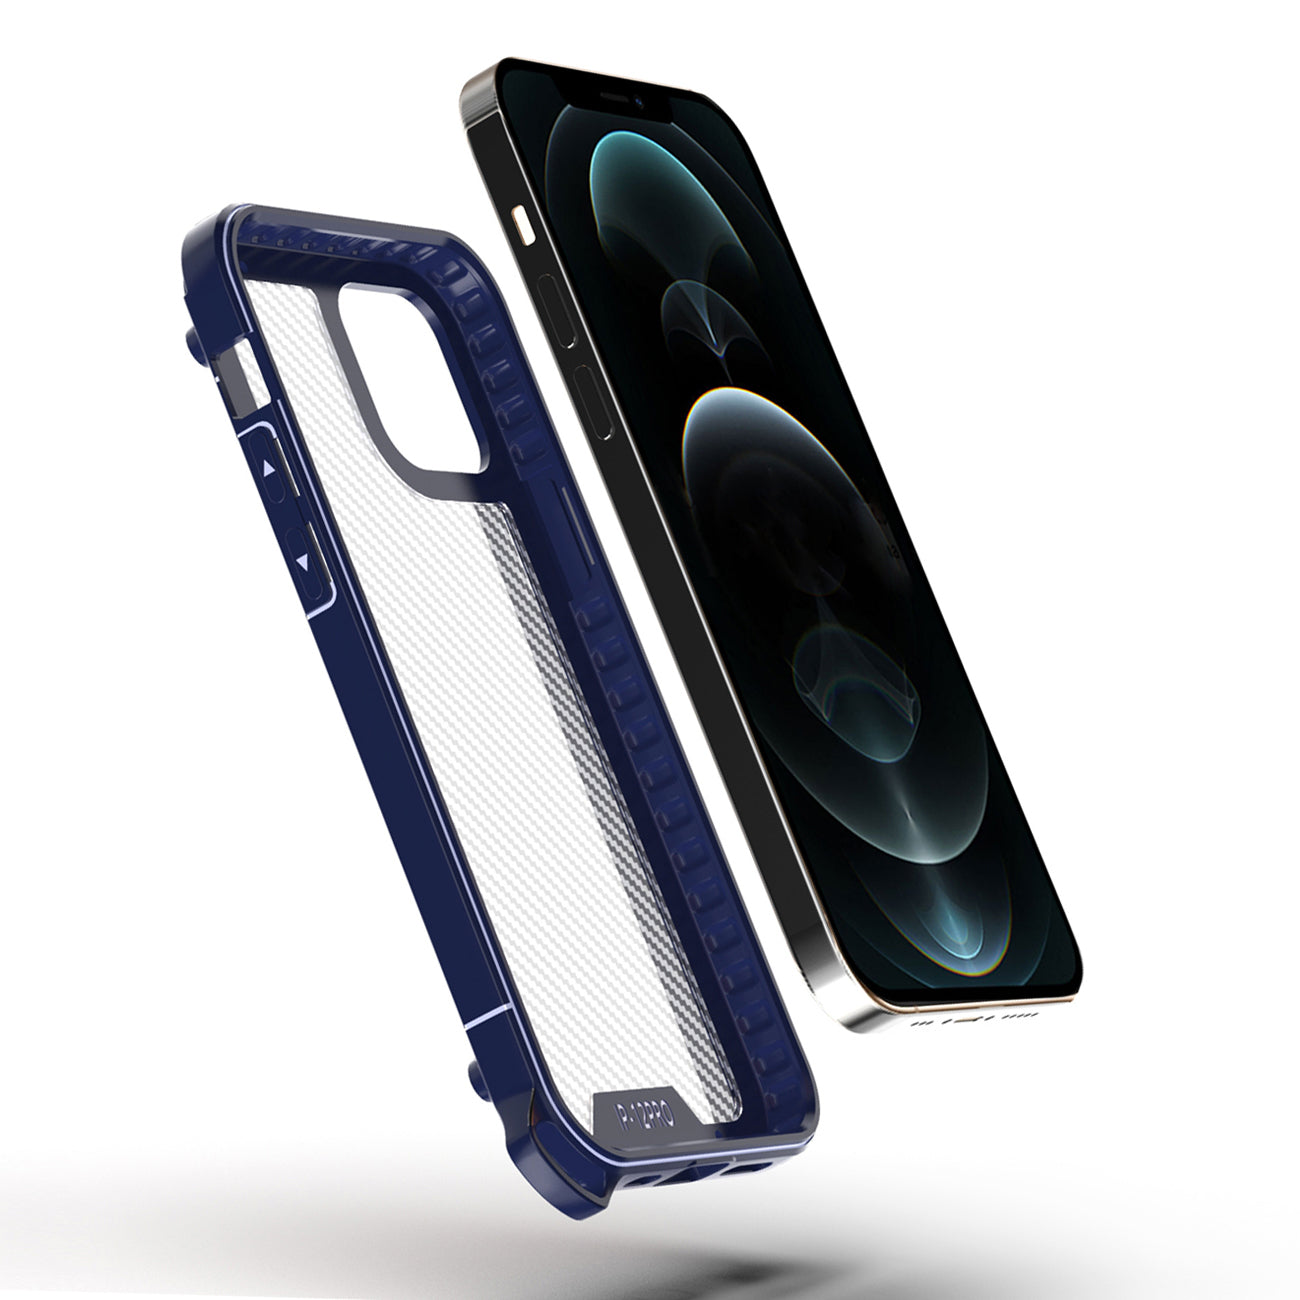 Reiko Shockproof PC Bumper Case With Carbon Fiber Pattern In Navy For iPhone 12 / 12 Pro